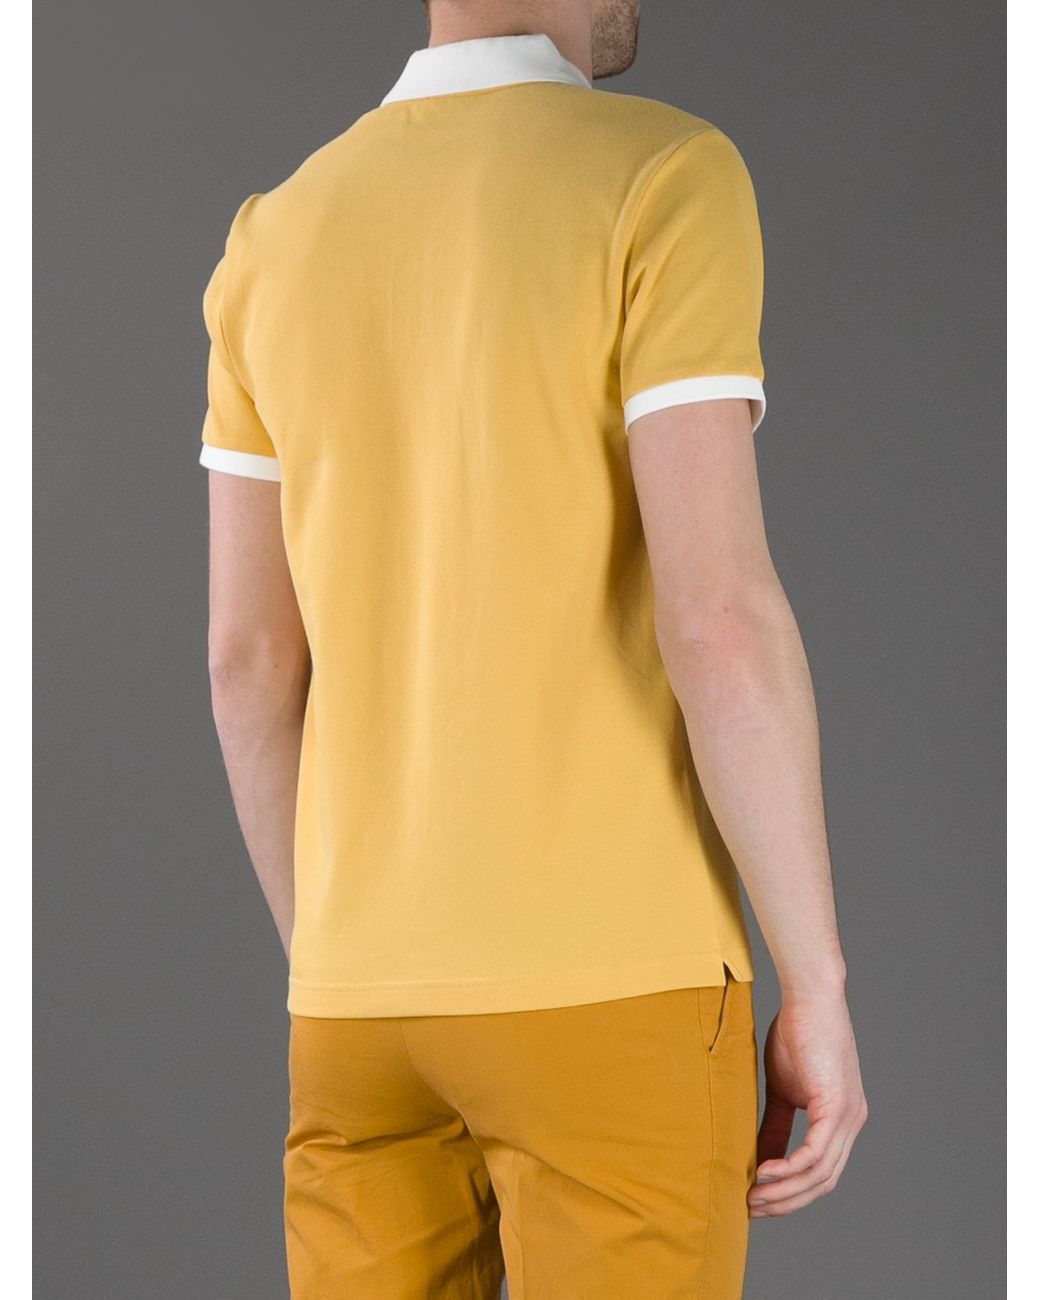 Moncler Classic Polo Shirt in Yellow for Men | Lyst